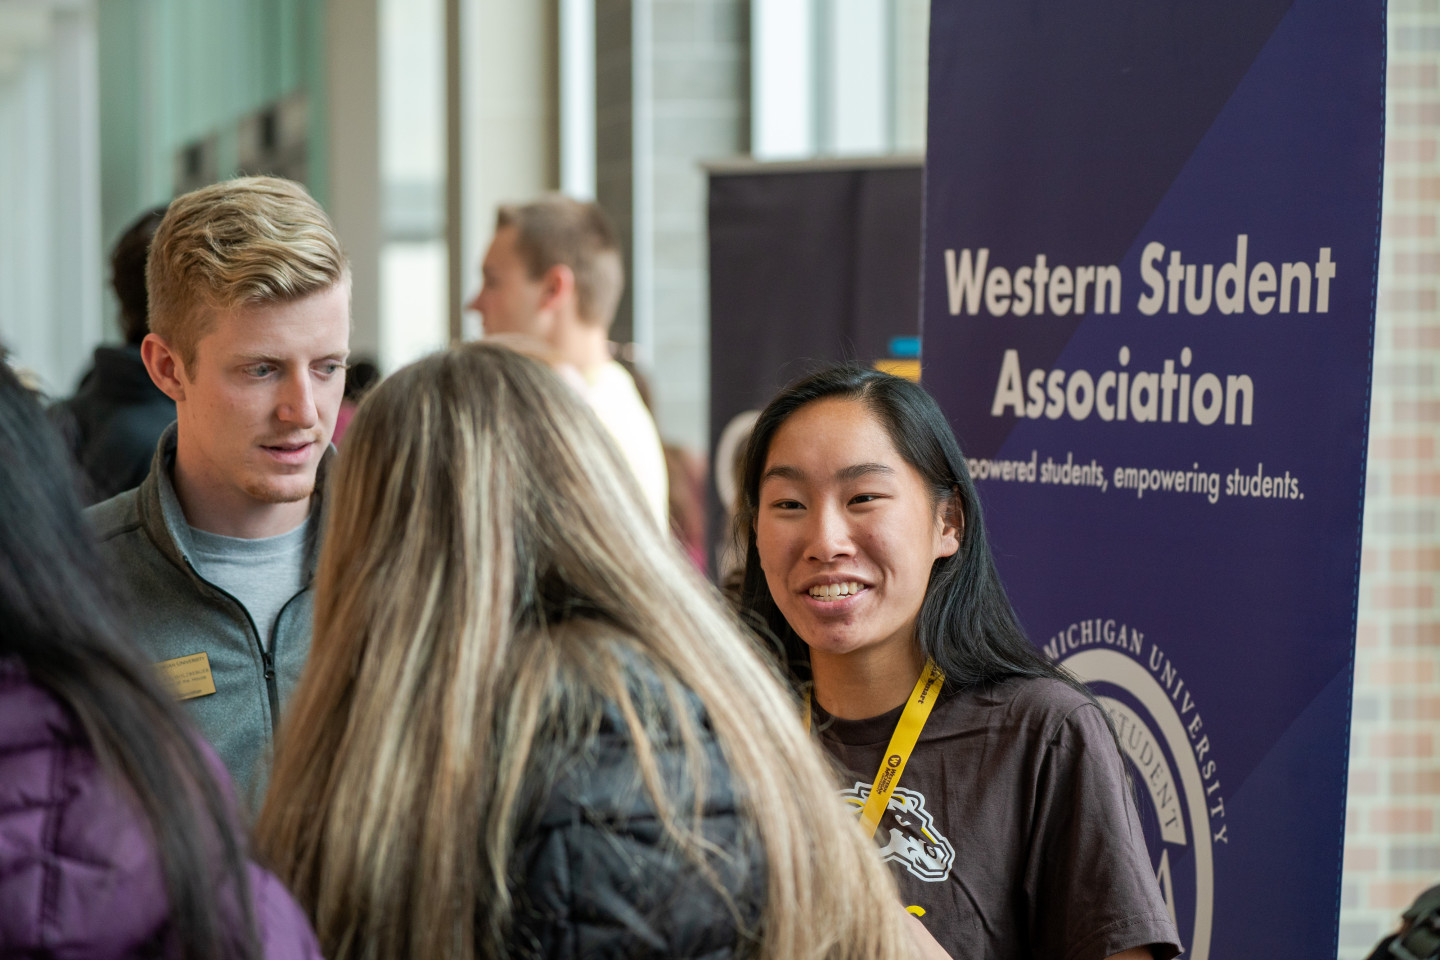 Students talk in front of a Western Student Association sign.